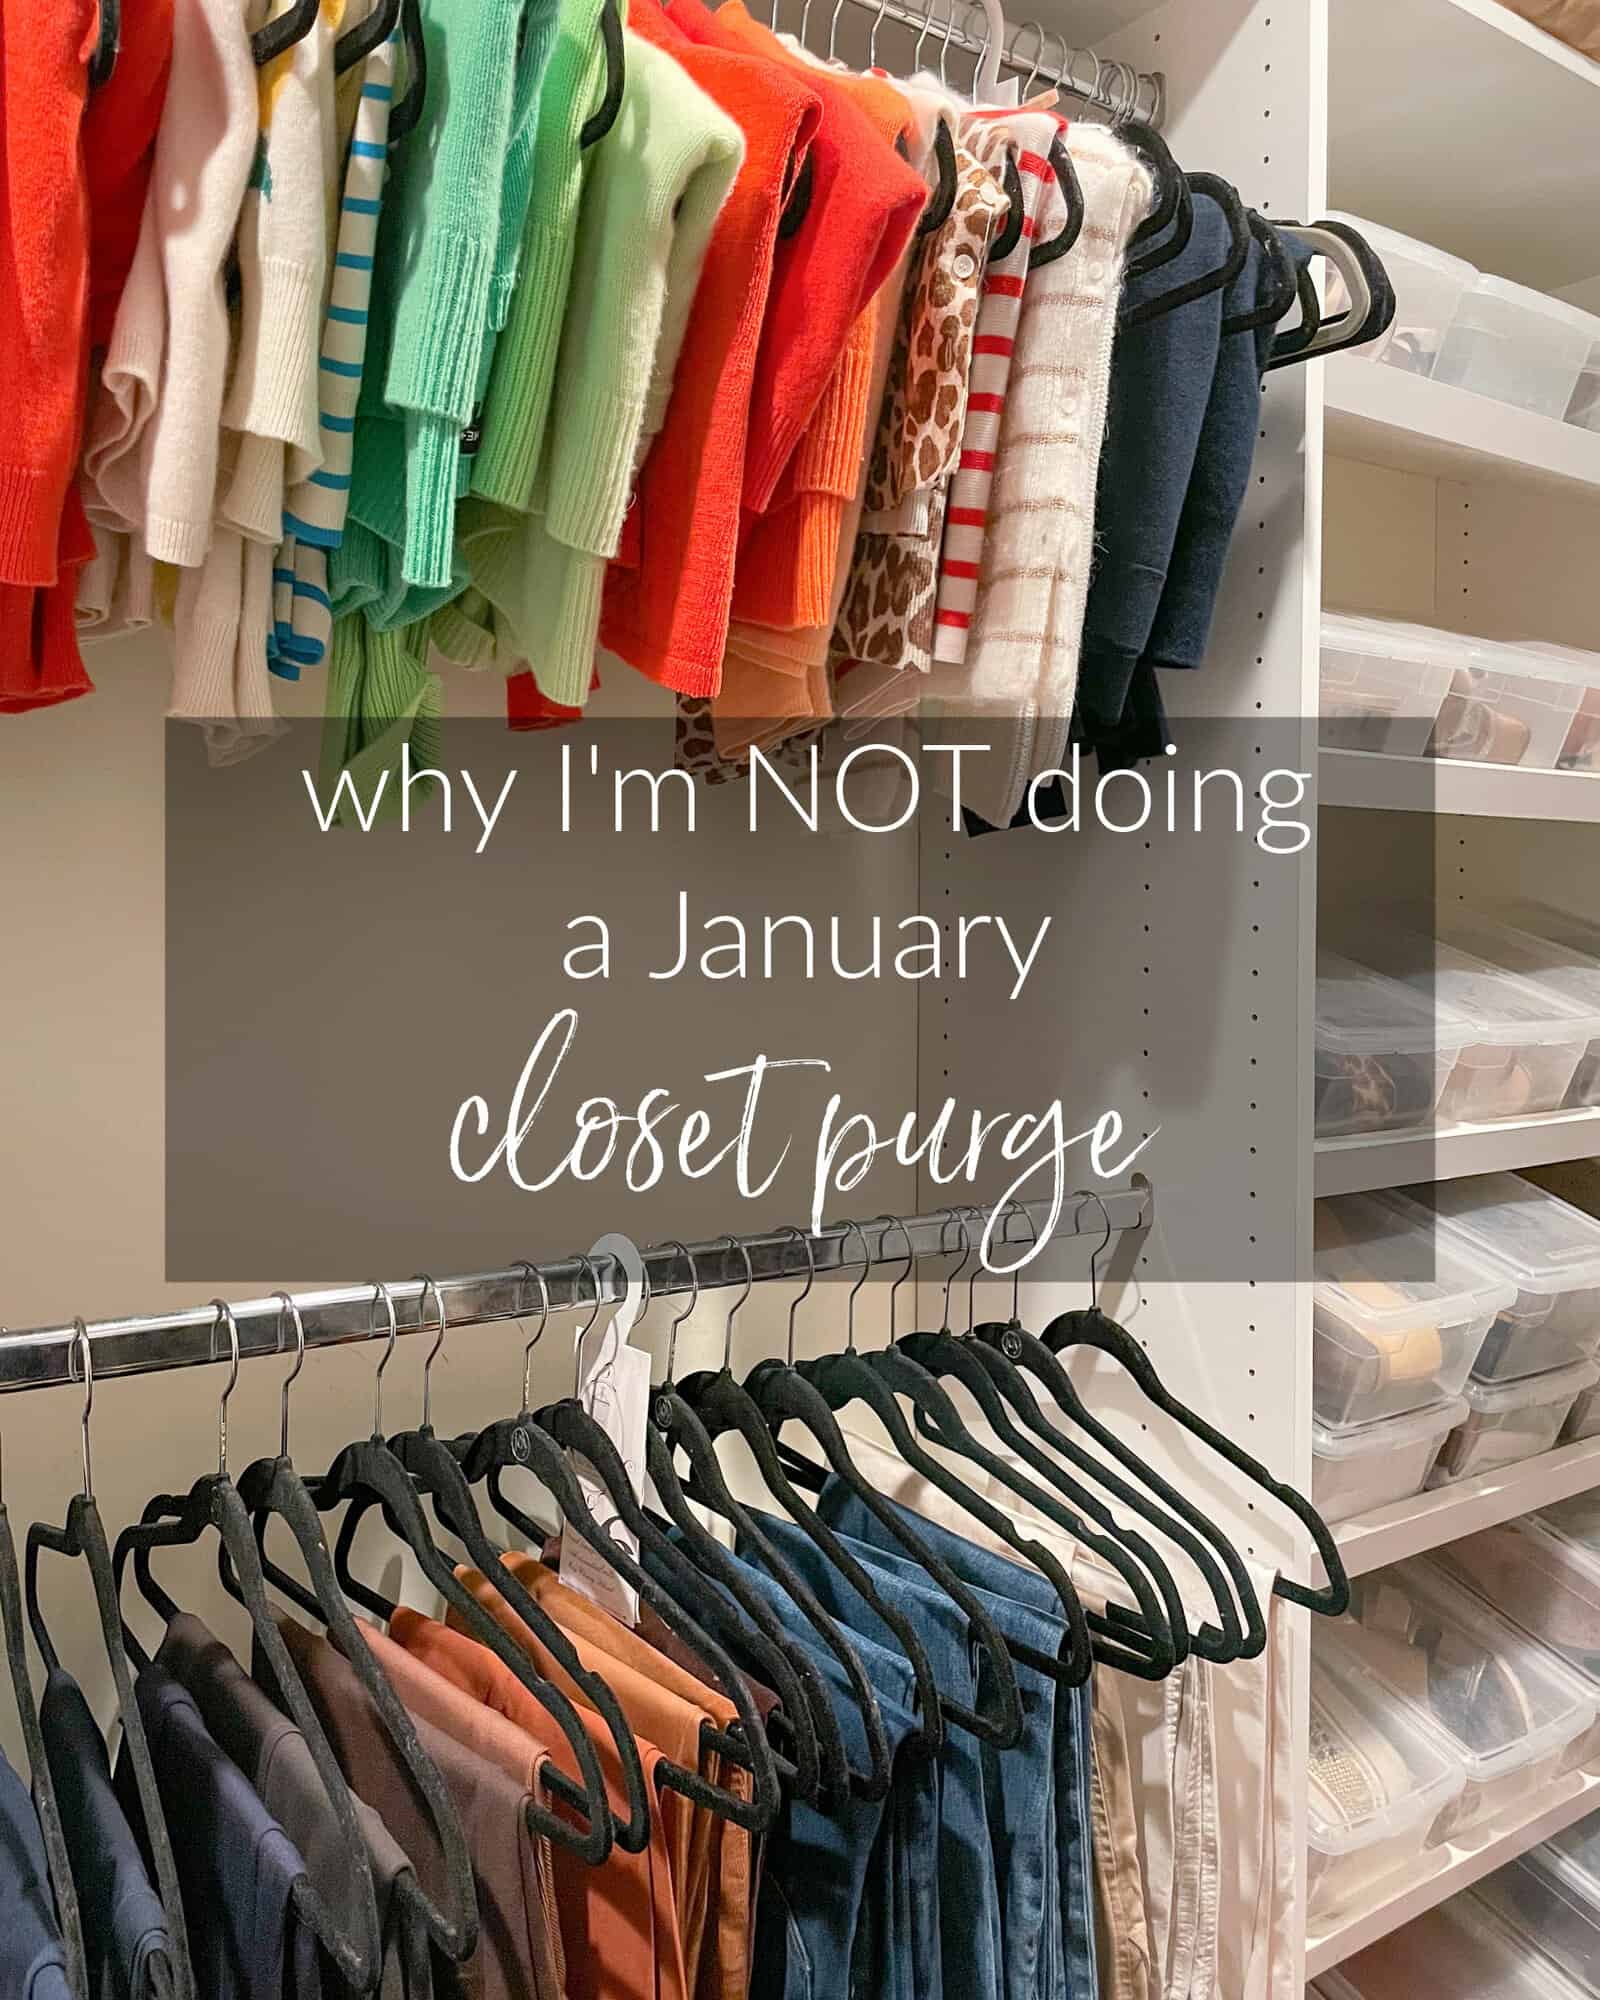 Why I’m NOT doing a major closet purge right now